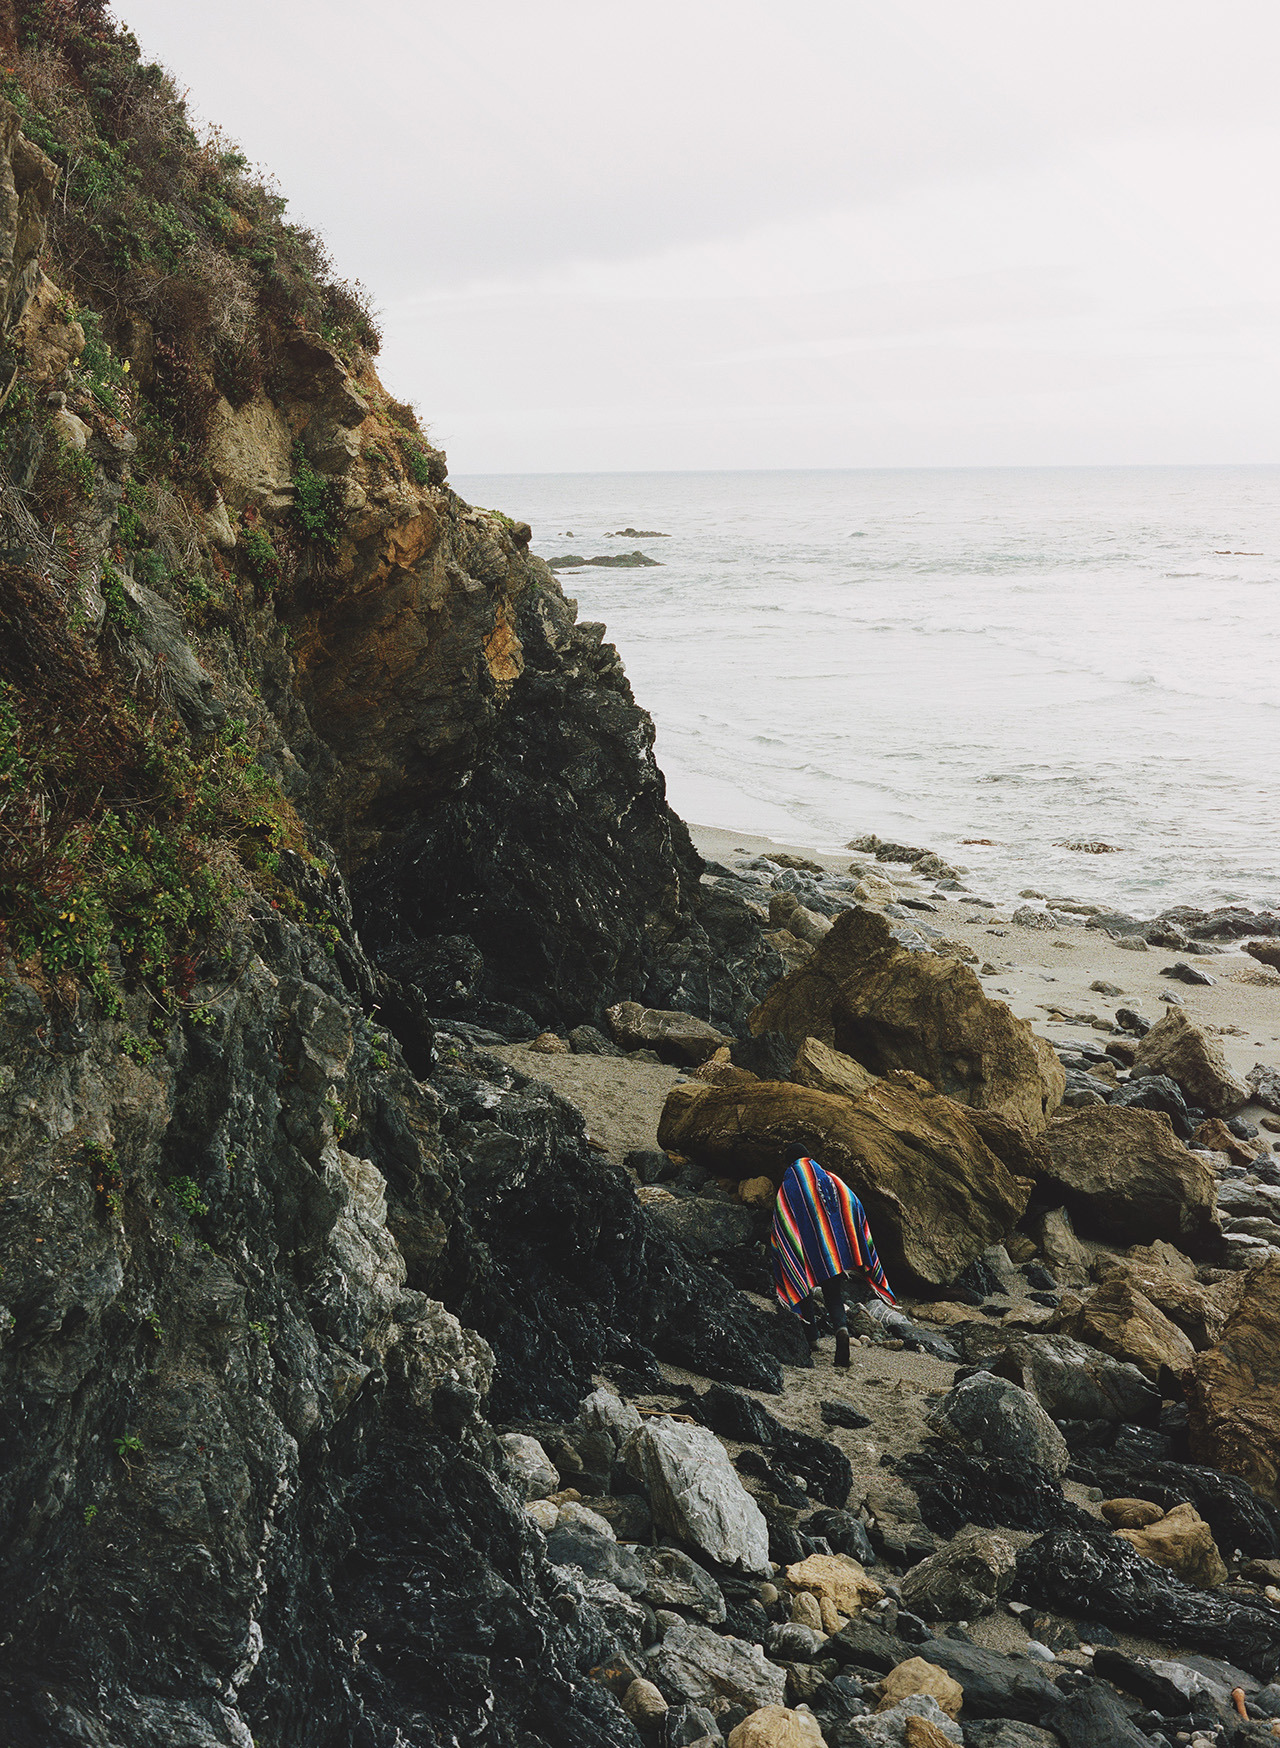 http://chantalanderson.tumblr.com/post/57027628592/most-days-i-want-to-wake-up-here-big-sur